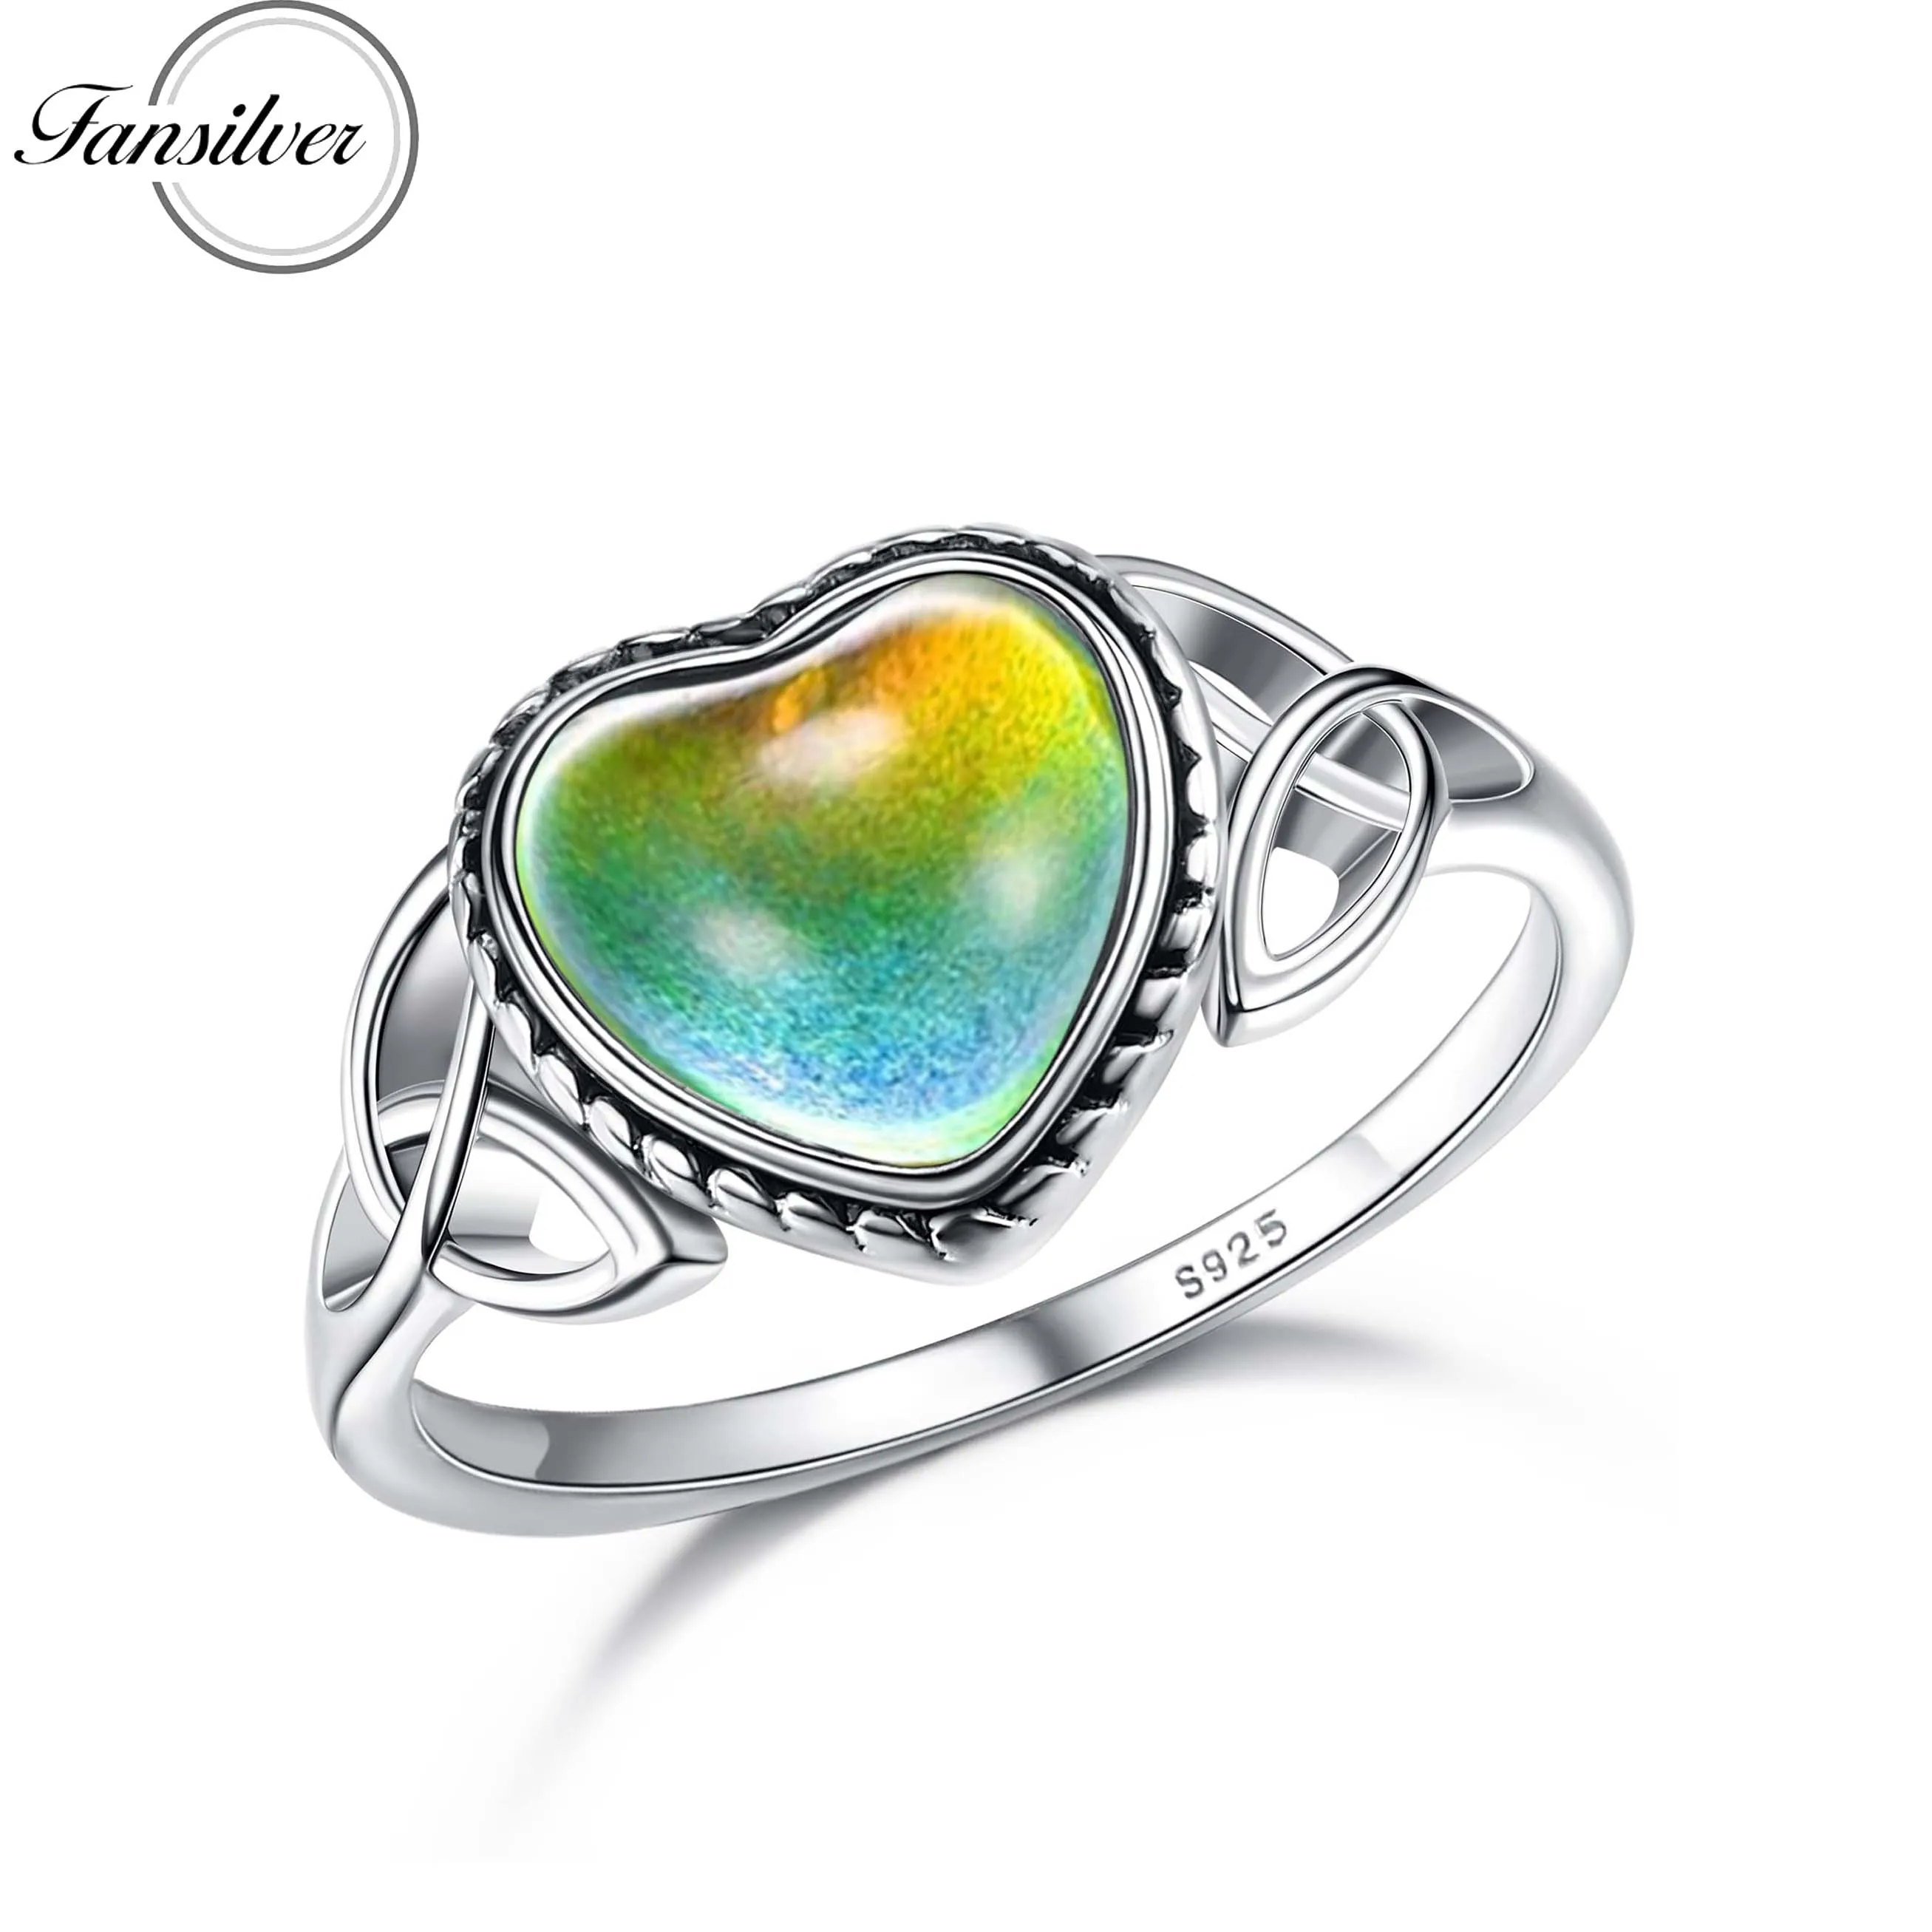 

Fansilver 925 Sterling Silver Mood Ring for Women 18K Gold Plated Heart Oval Temperature Control Color Change Mood Ring Jewelry